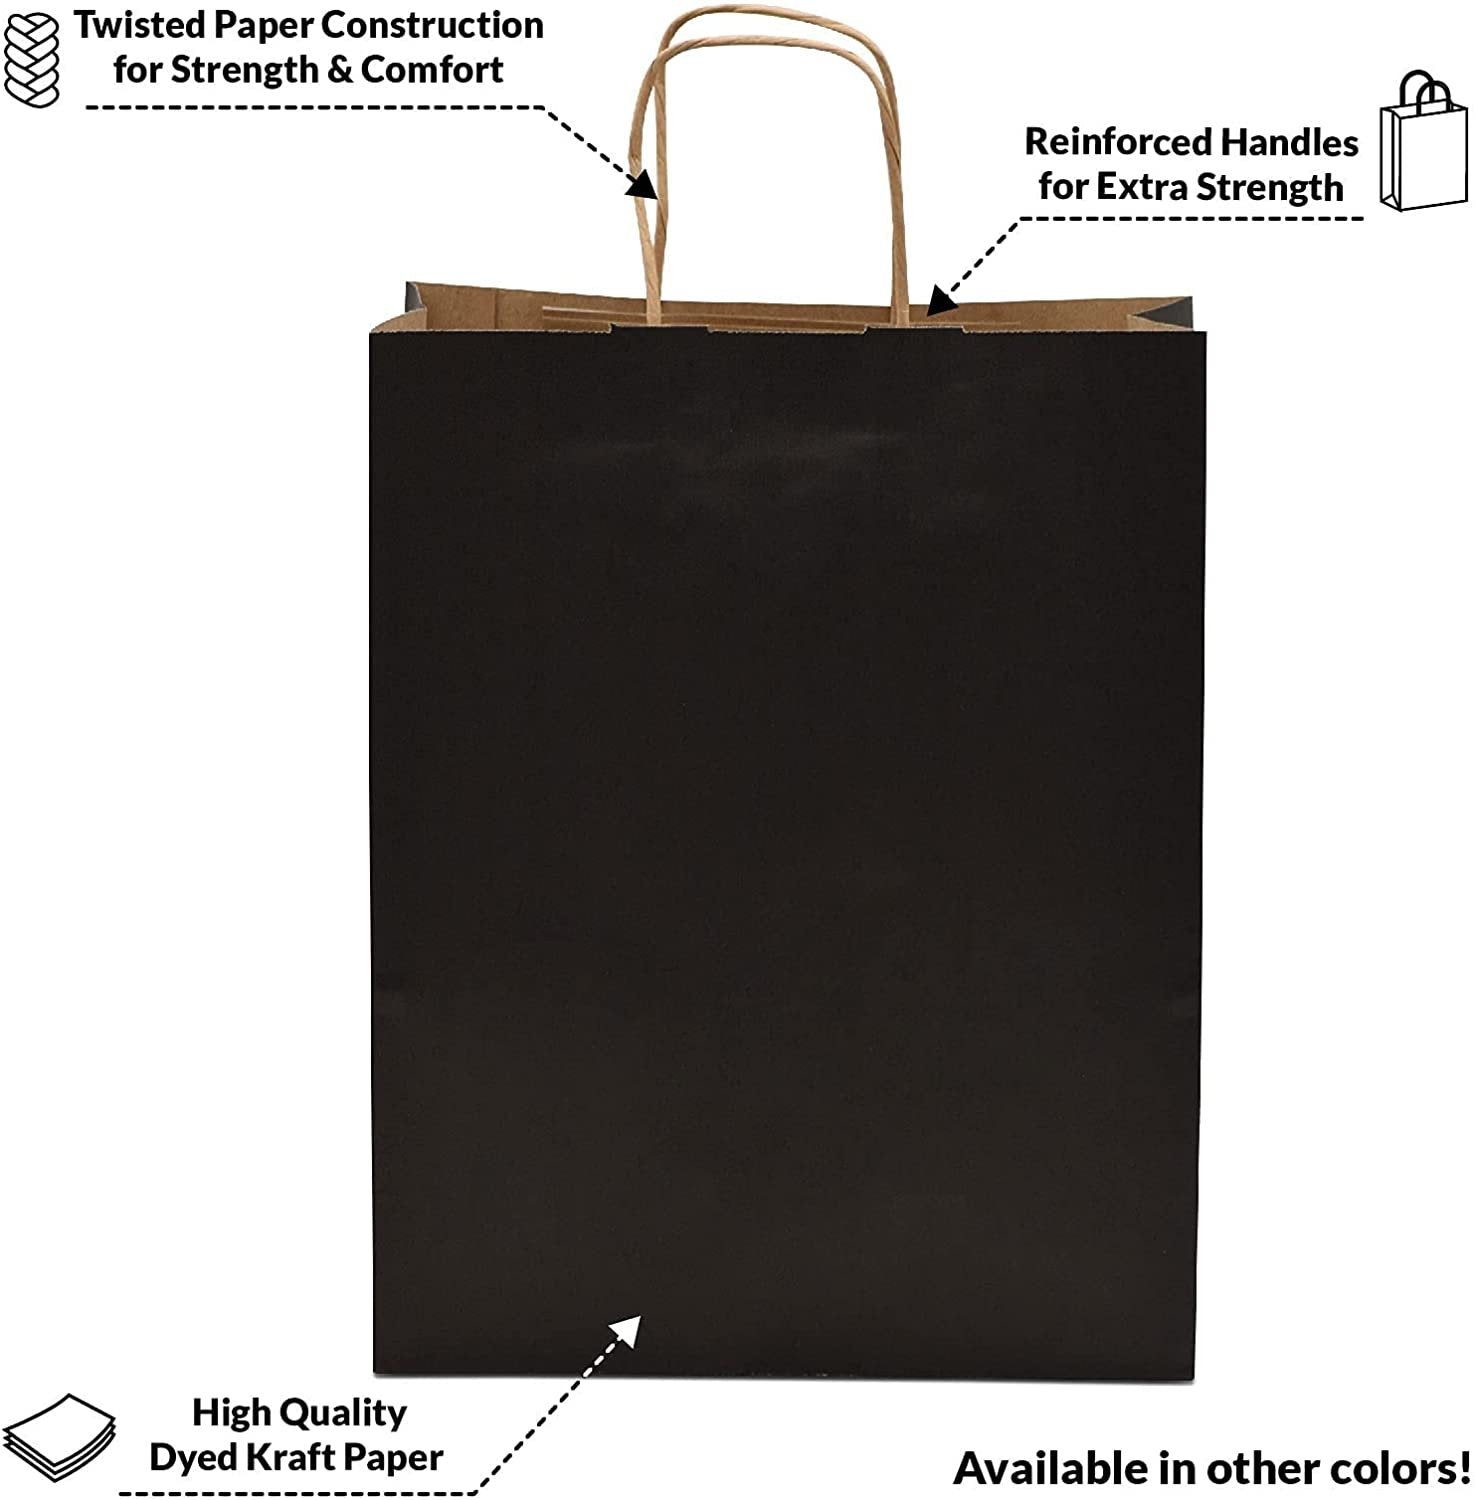 Black Gift Bags with Handles - 10x5x13 Inch 100 Pack Medium Kraft Paper Shopping Bags, Craft Totes in Bulk for Boutiques, Small Business, Retail Stores, Birthdays, Party Favors, Jewelry, Merchandise